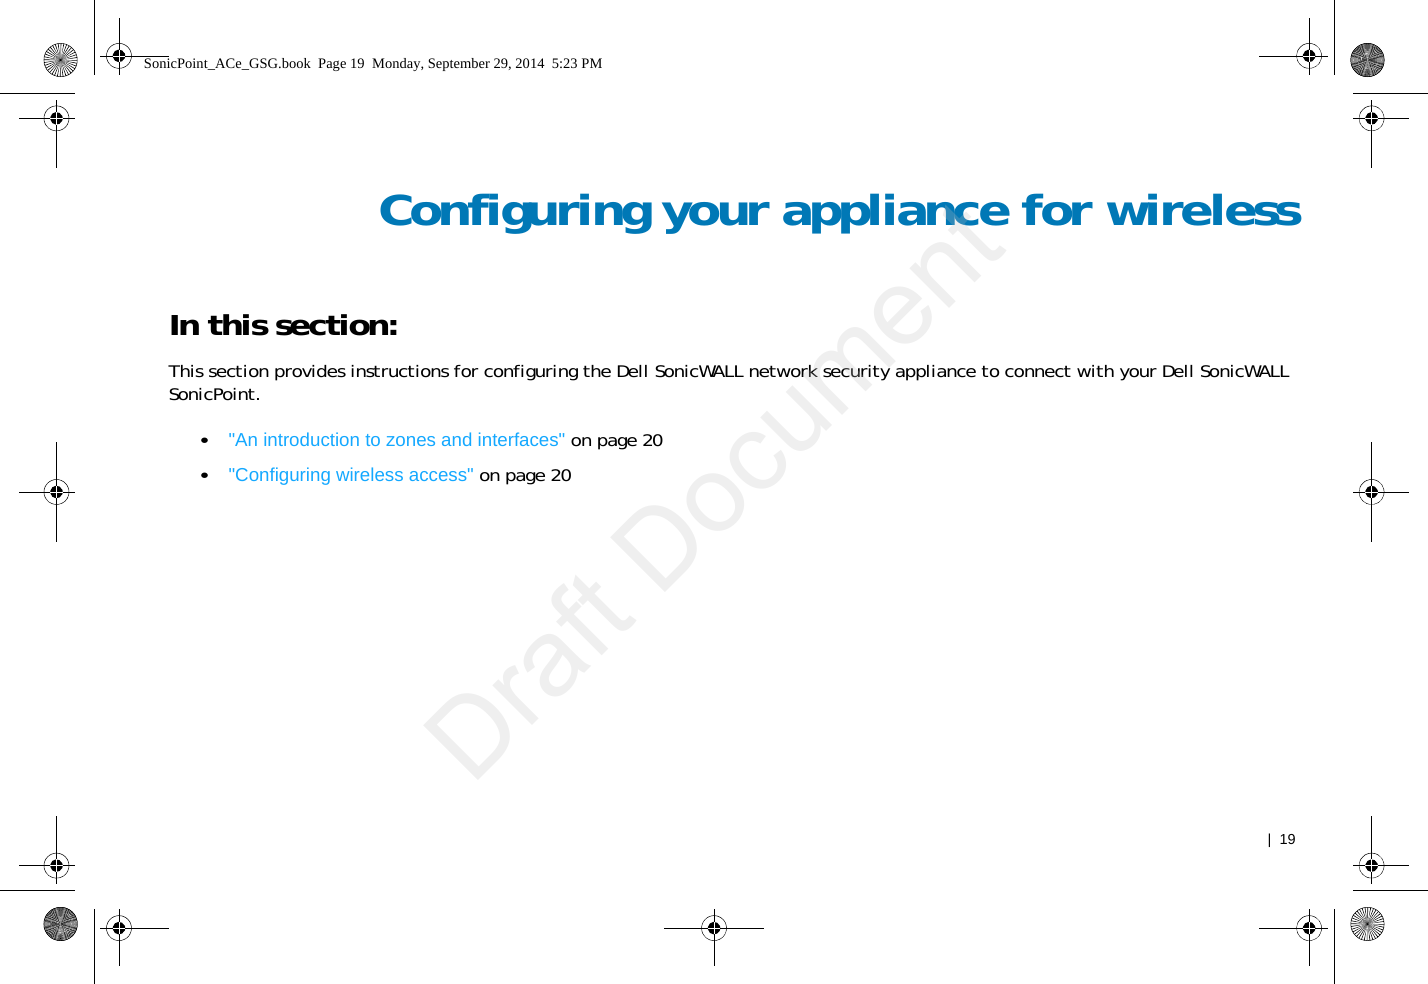   |  19Configuring your appliance for wirelessIn this section:This section provides instructions for configuring the Dell SonicWALL network security appliance to connect with your Dell SonicWALL SonicPoint.•&quot;An introduction to zones and interfaces&quot; on page 20•&quot;Configuring wireless access&quot; on page 20SonicPoint_ACe_GSG.book  Page 19  Monday, September 29, 2014  5:23 PMDraft Document